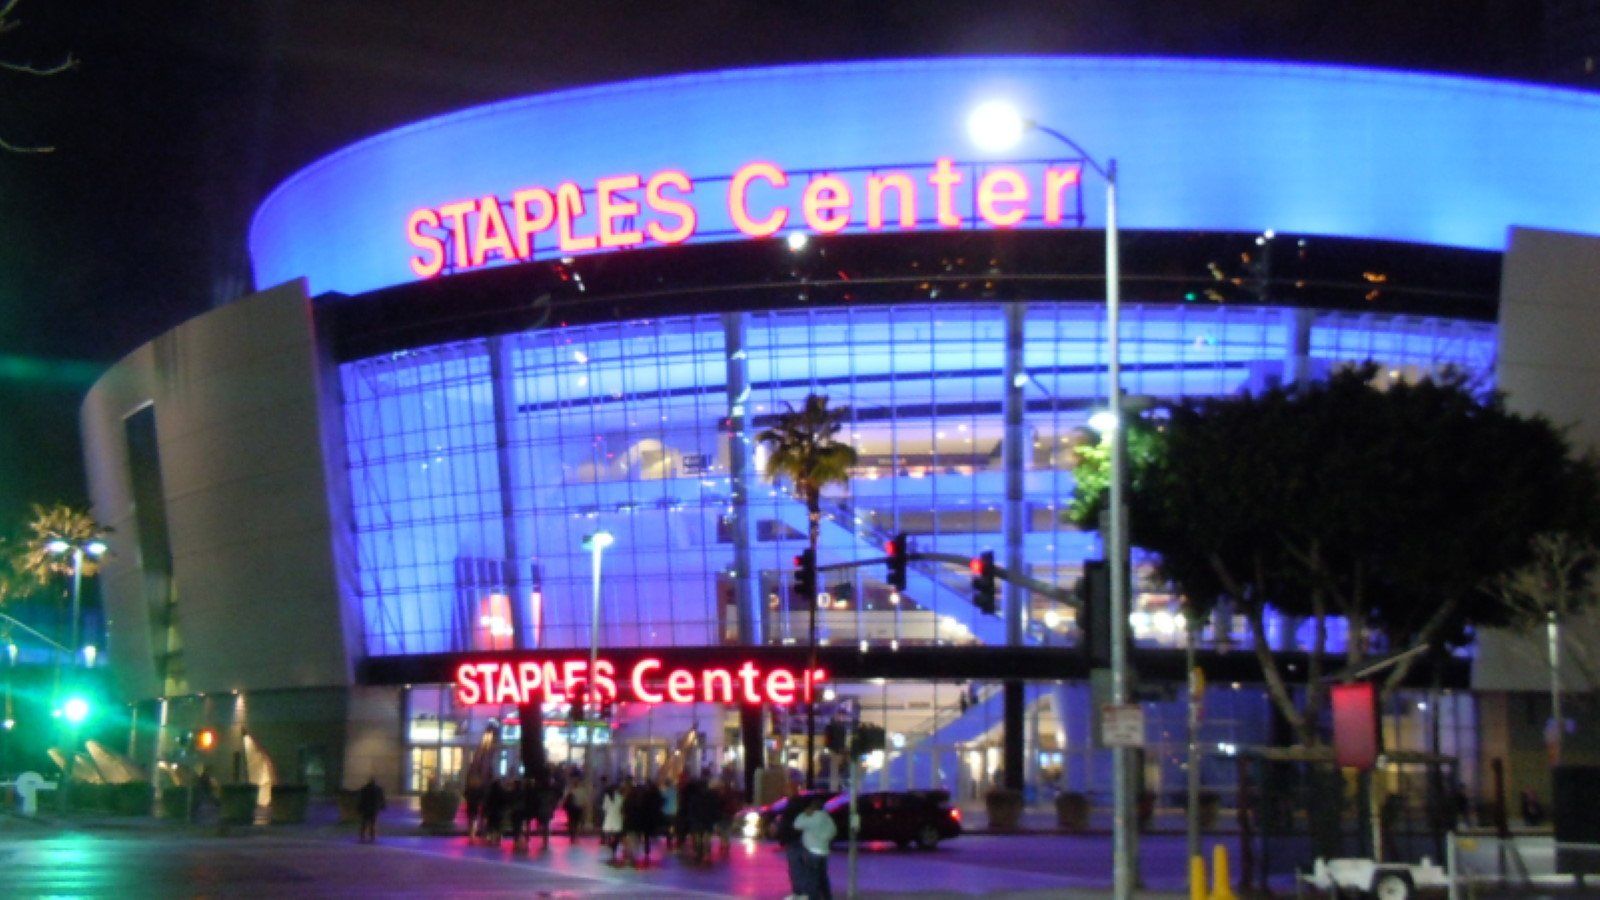 Best Staples Center Seats and Ticket Information Guide Info